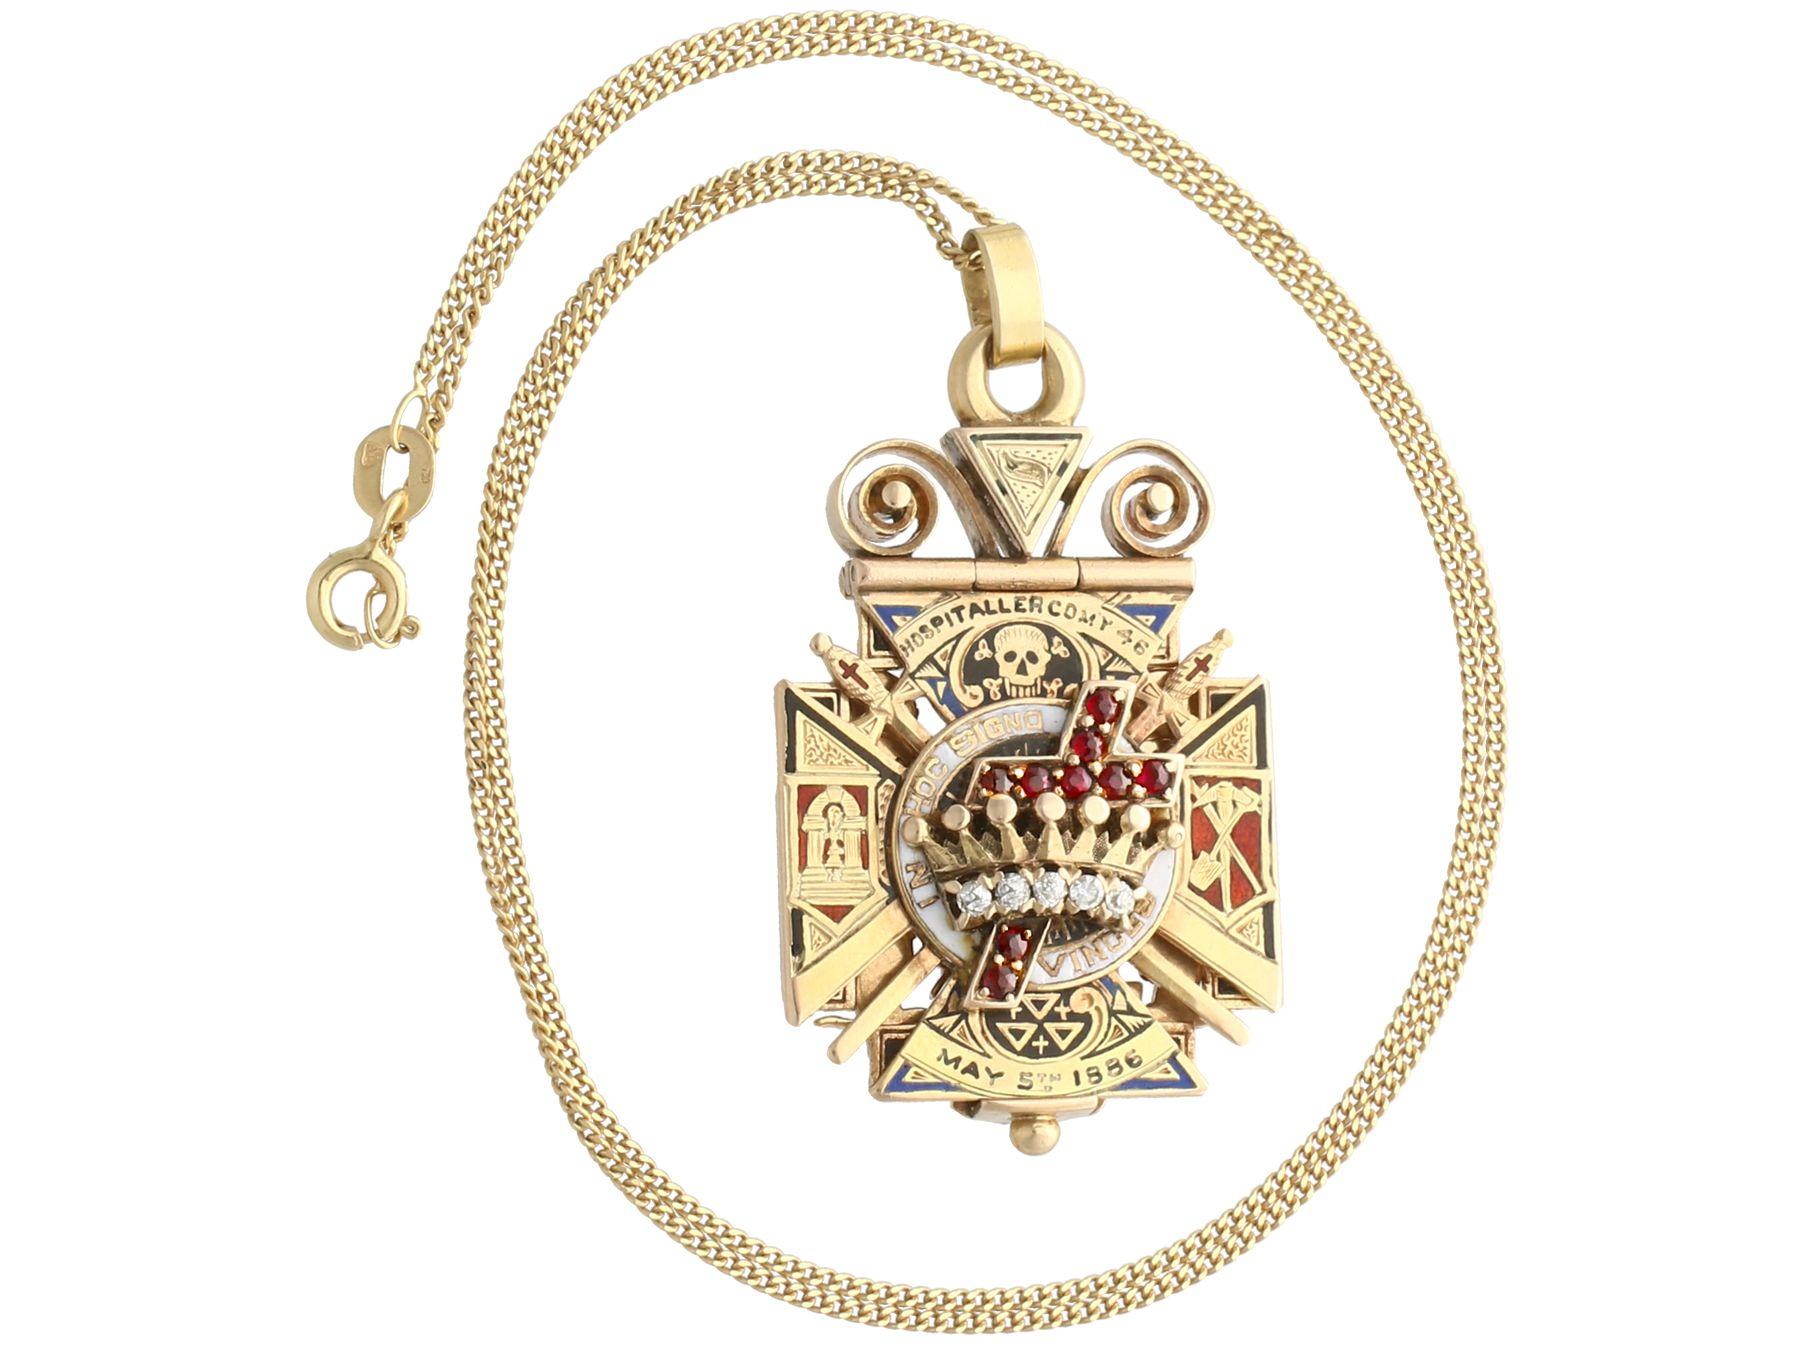 A stunning, fine and impressive antique Victorian 0.29Ct diamond, 0.20Ct ruby and enamel, 12k yellow gold Masonic pendant / watch fob; part of our diverse Freemasonry jewelry and estate jewelry collections.

This stunning, fine and impressive 